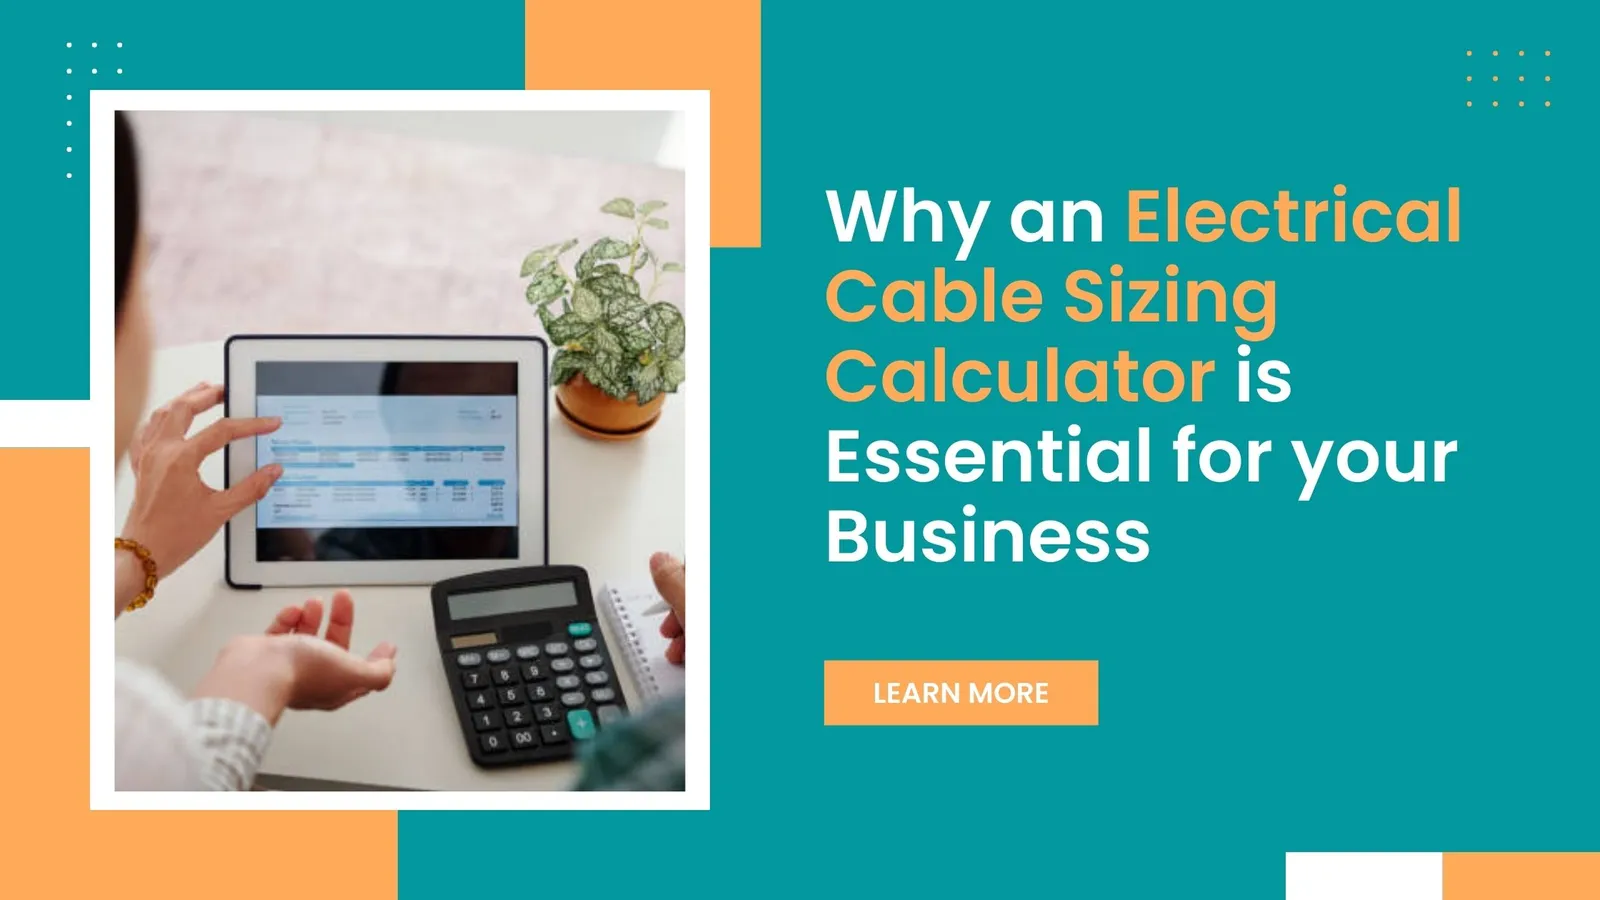 Why an Electrical Cable Sizing Calculator is Essential for your Business